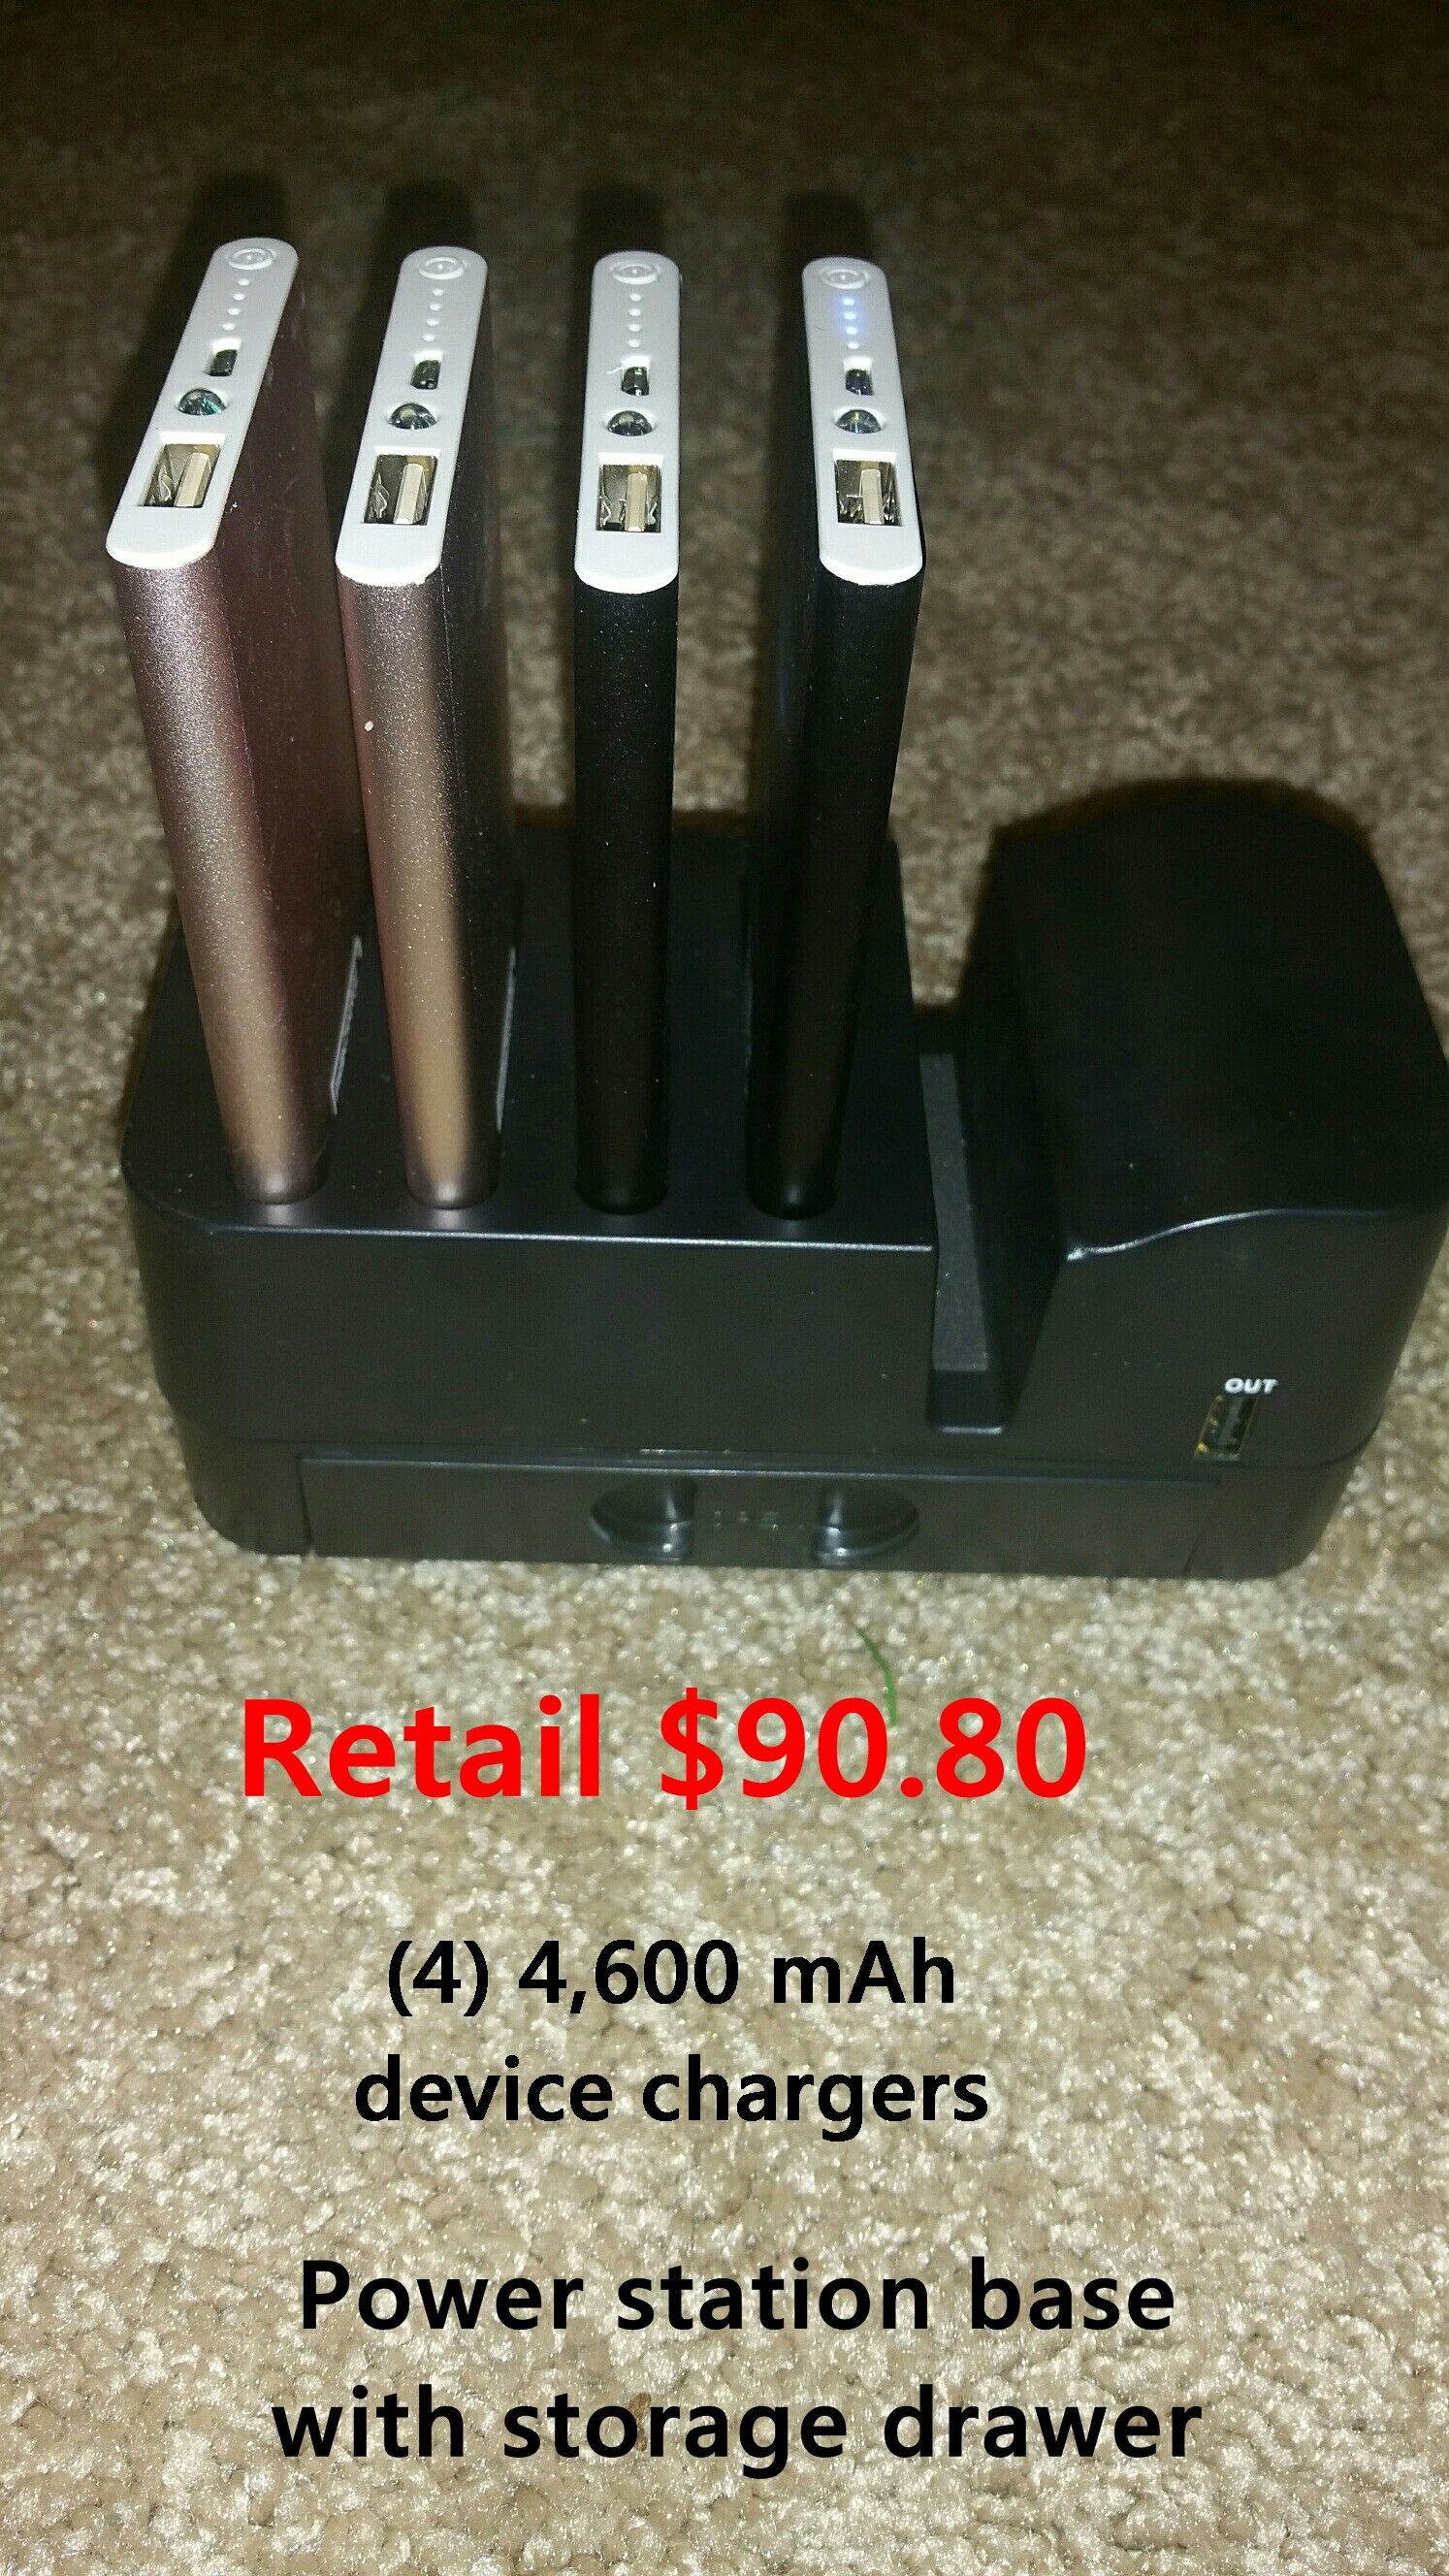 New 4,600 mAh Cell Ipad Chargers 4 pk